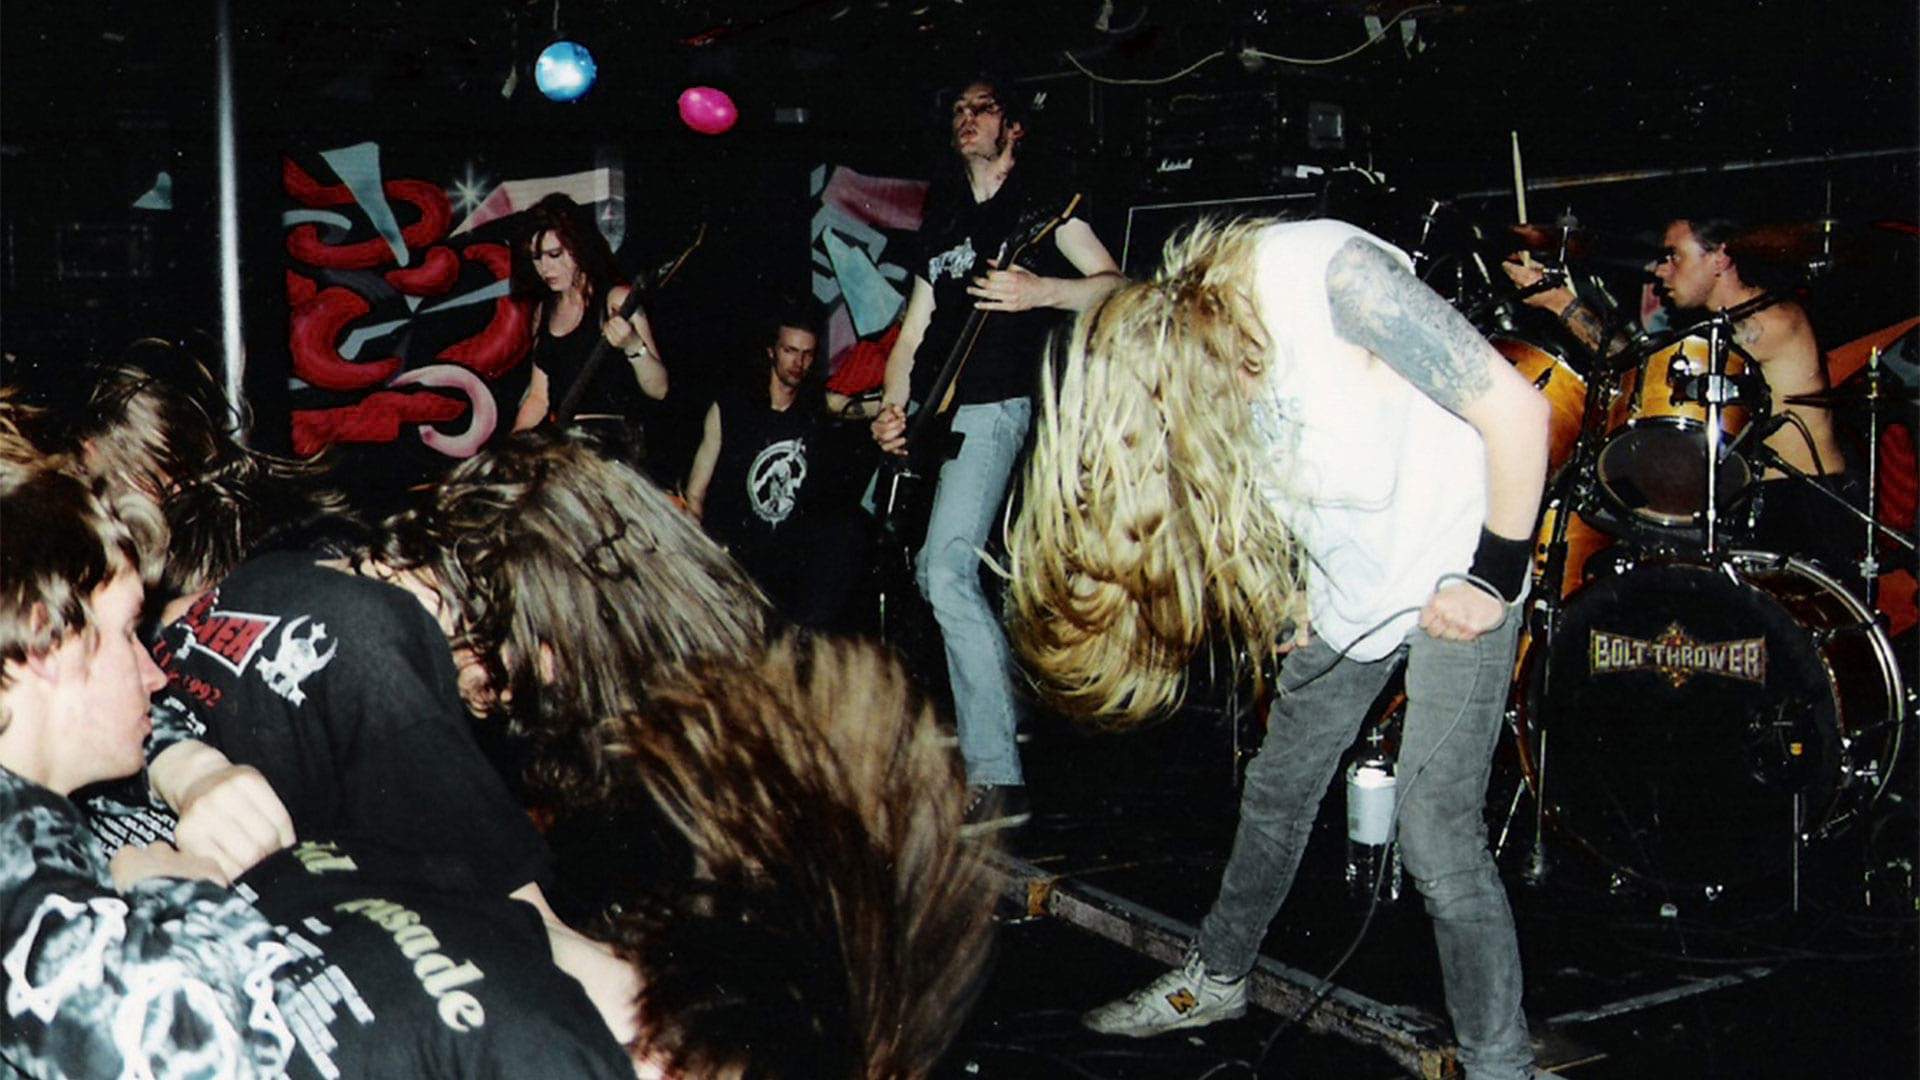 Years Ago: BOLT THROWER live in Birmingham first time playing Real